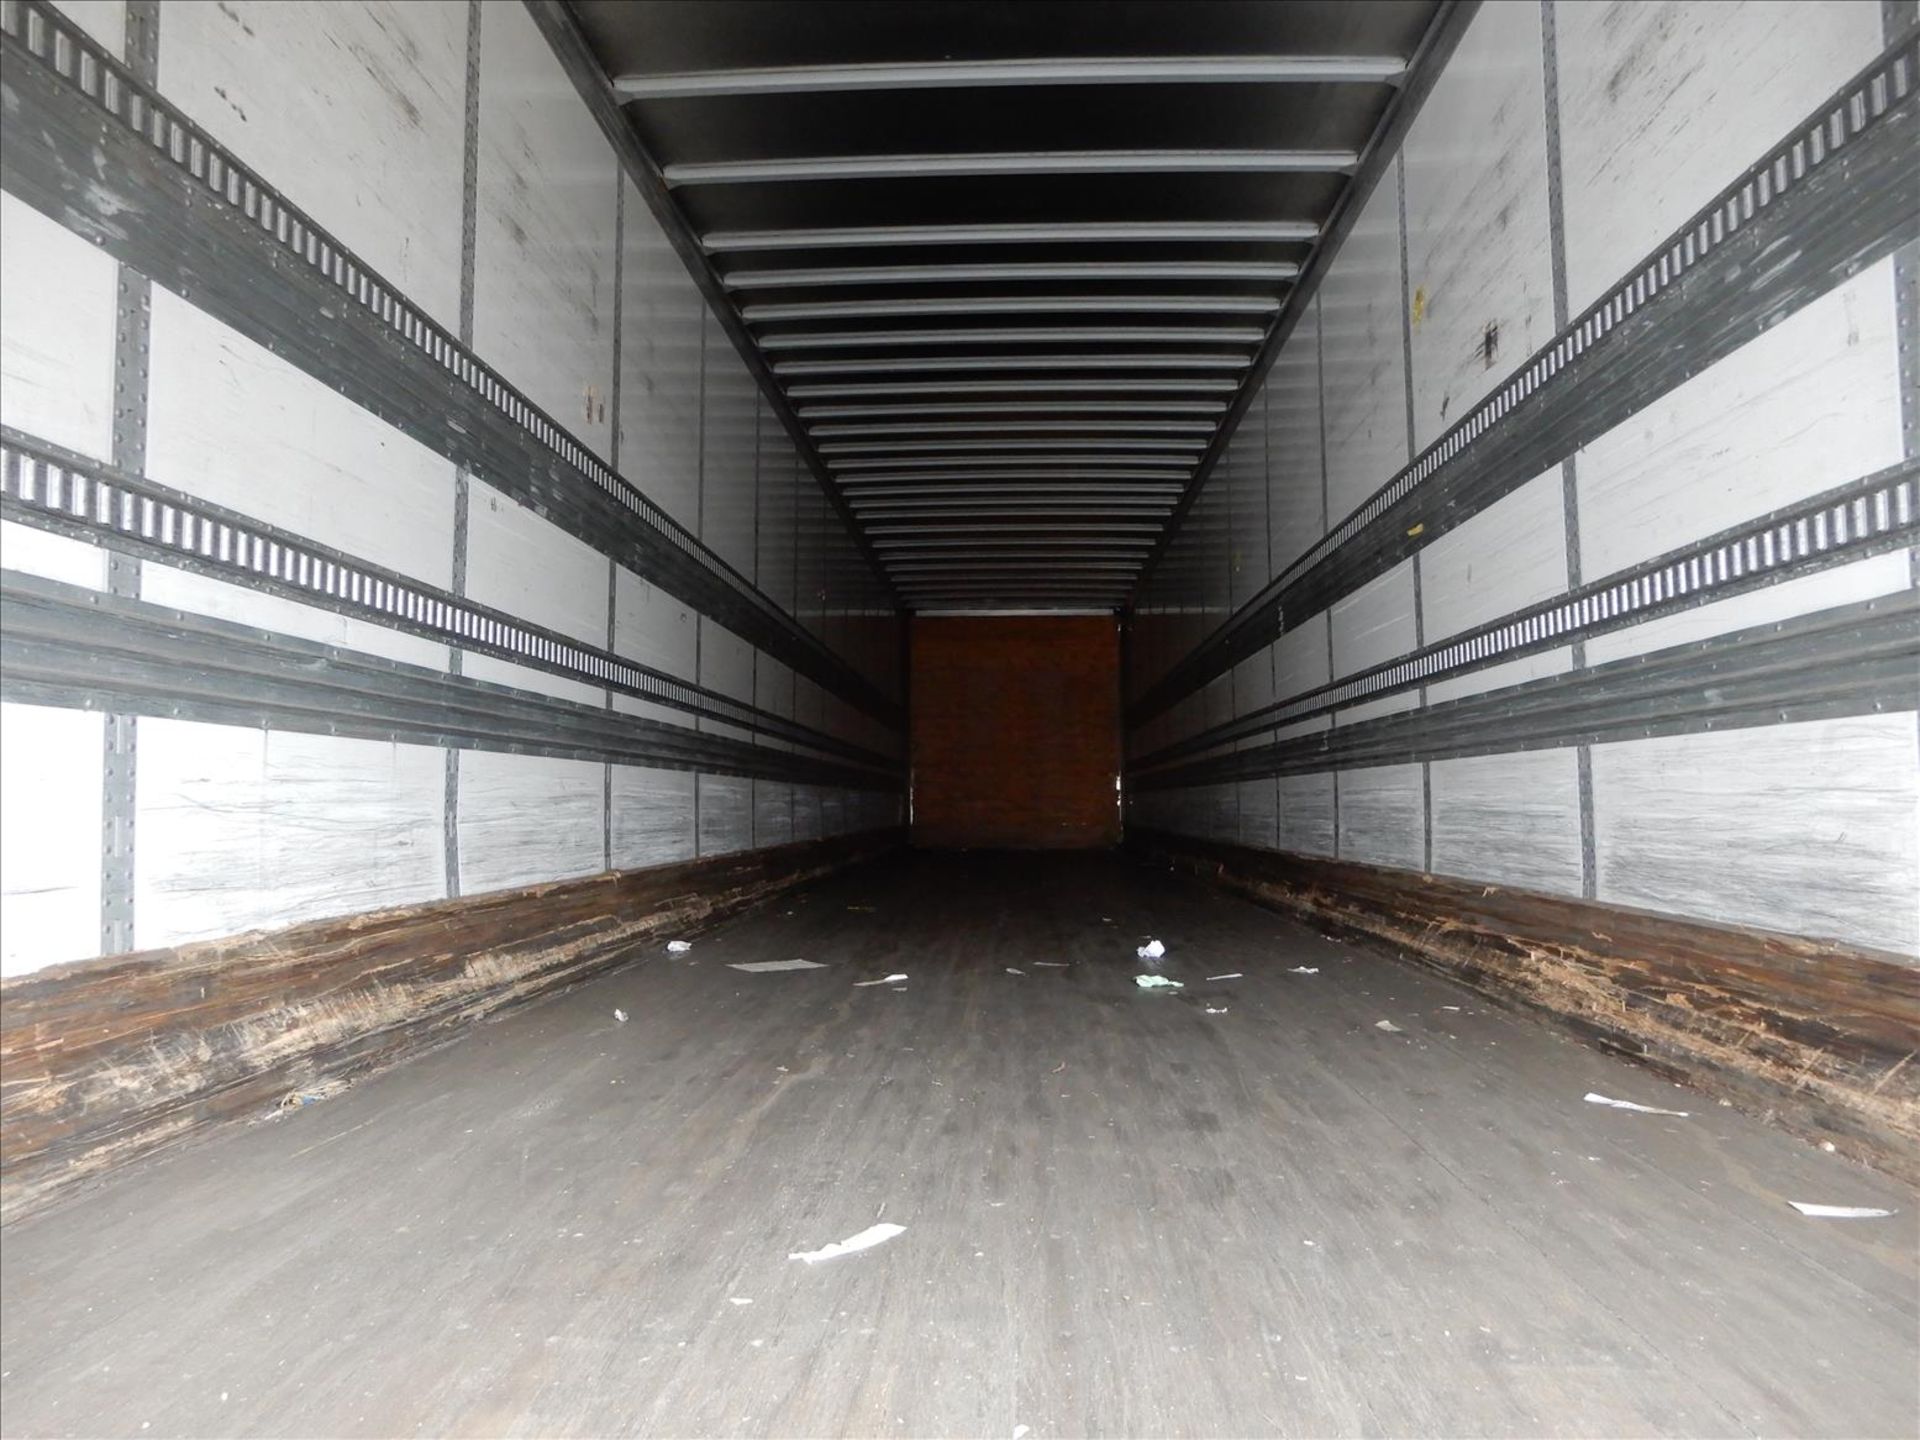 2012 Stoughton Trailer - Located in Indianapolis, IN - Image 26 of 33